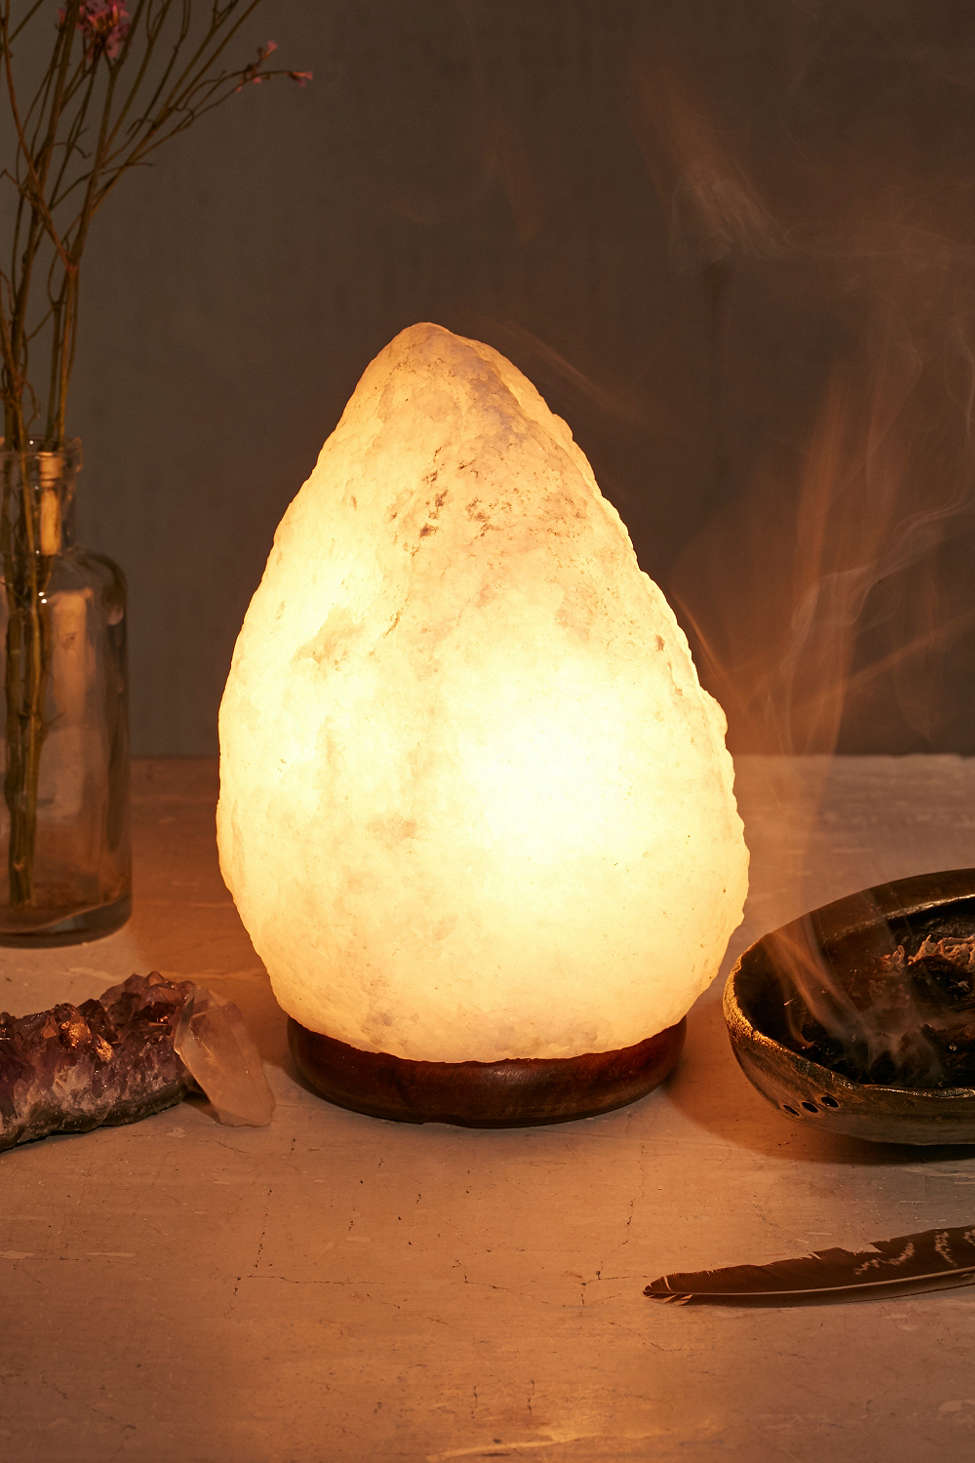 Himalayan salt lamp from Urban Outfitters